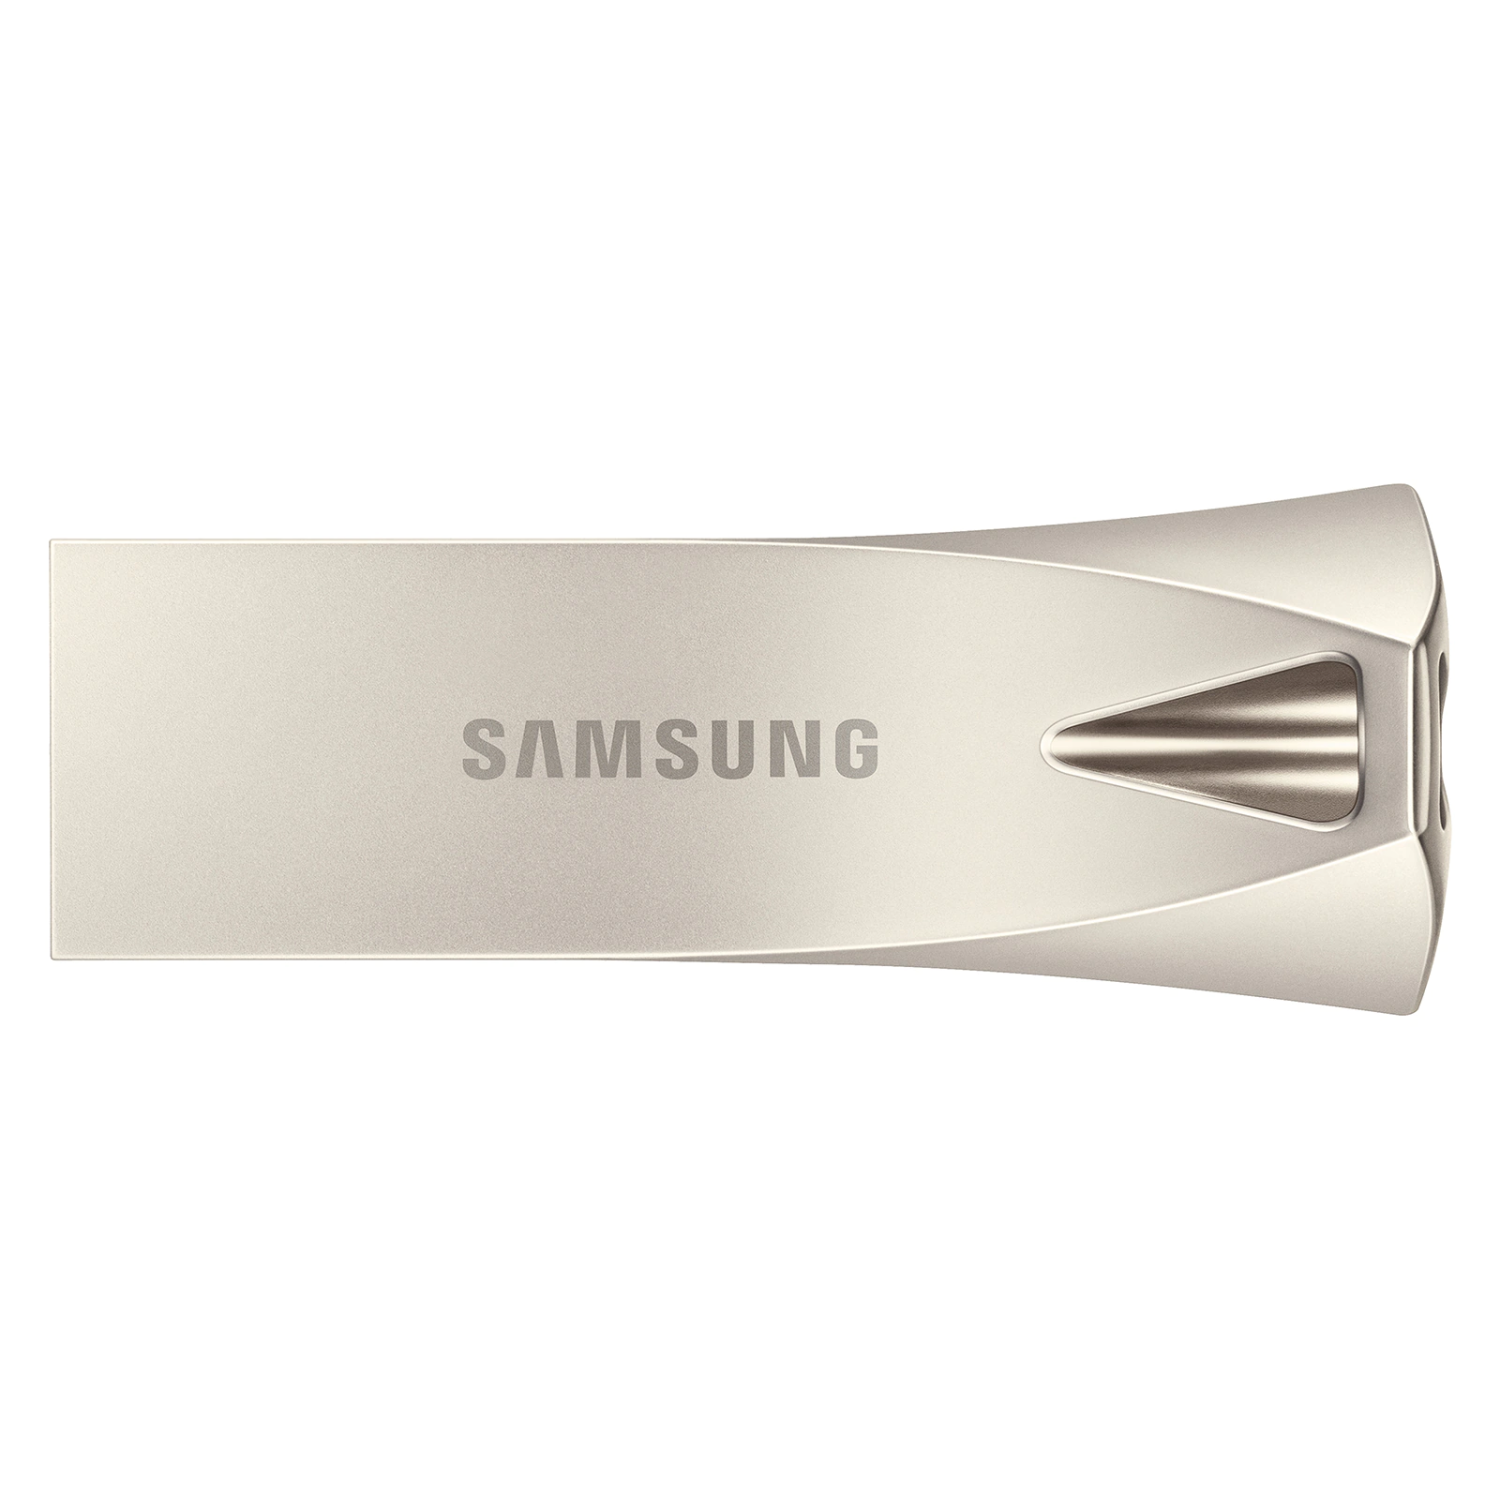 Samsung 128GB USB 3.1 Flash Drive BAR Plus Champagne Silver up to 400MB/s (MUF-128BE3)